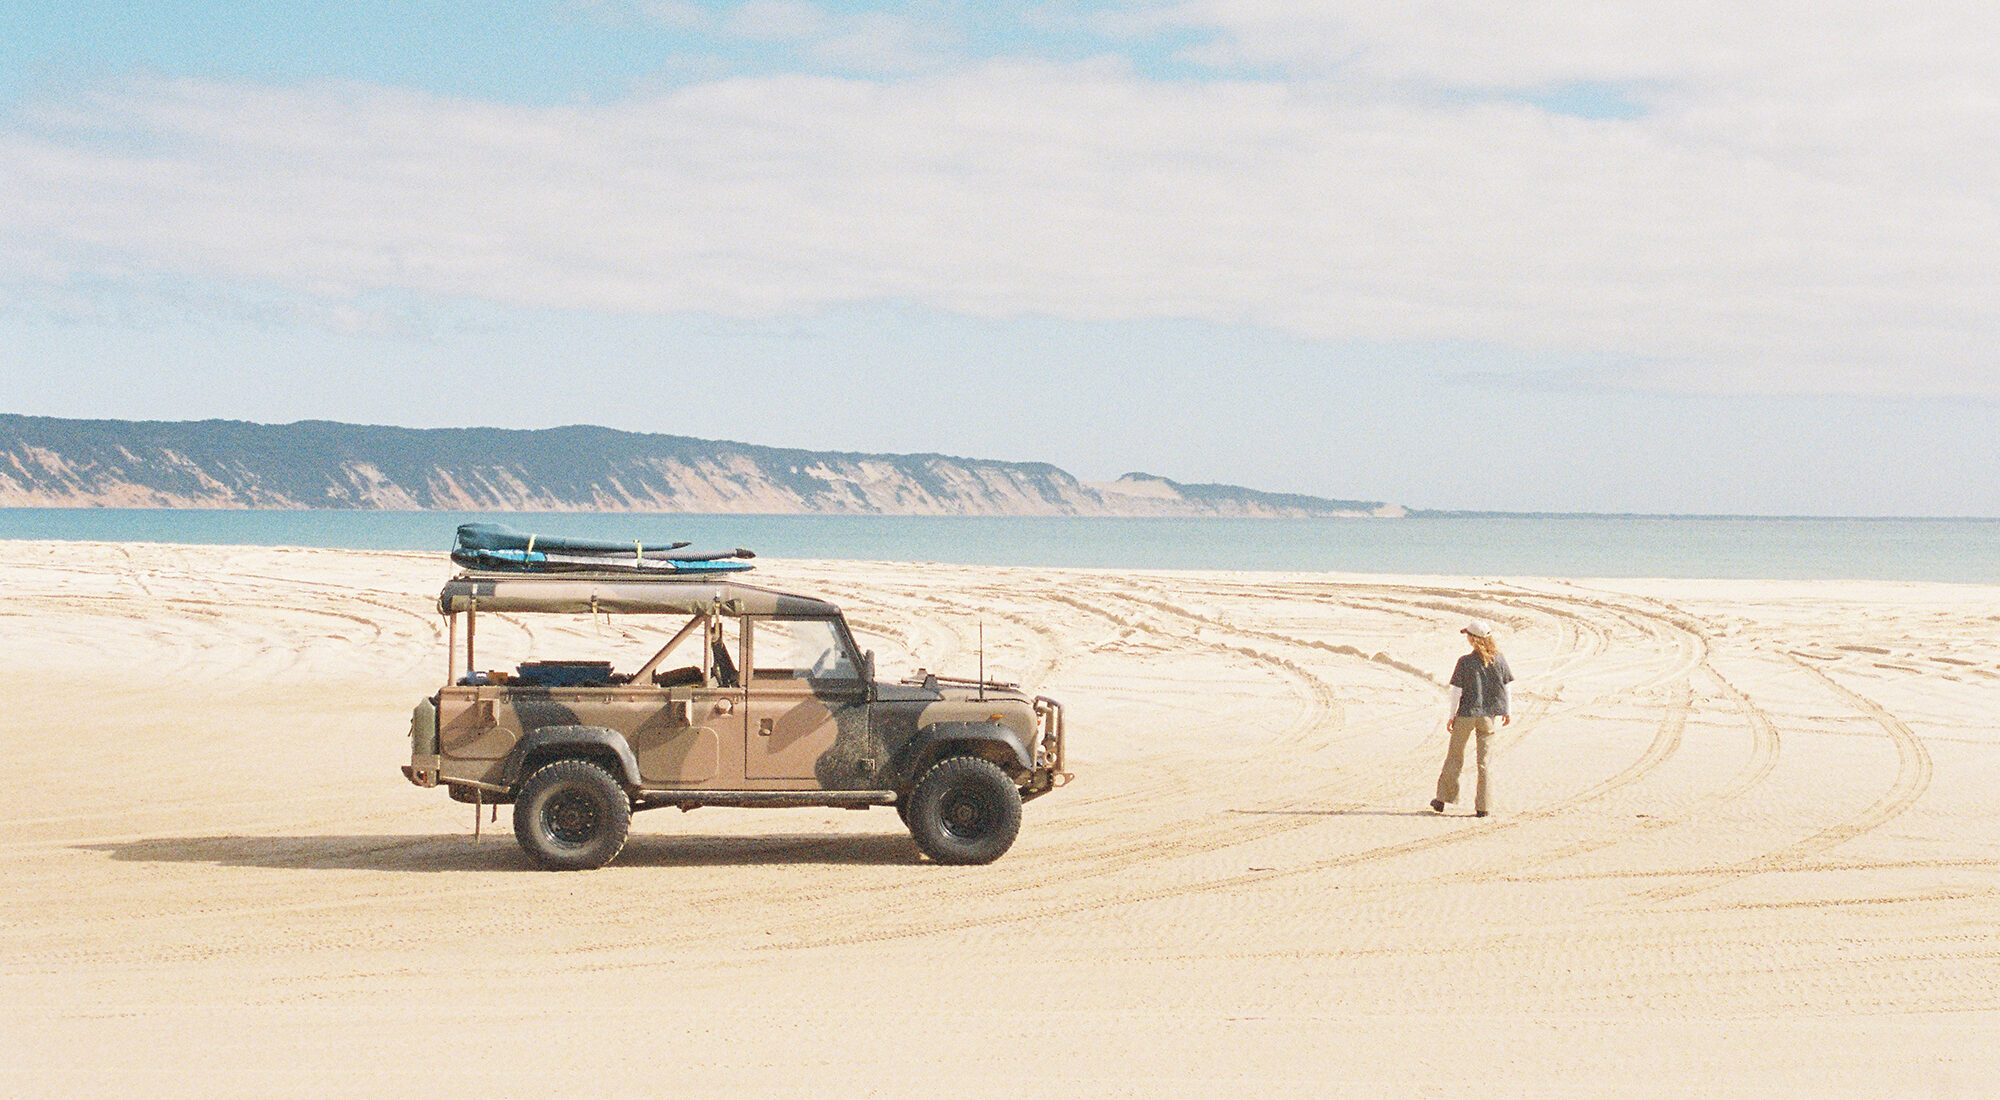 A person stood next to an old car on a beach.